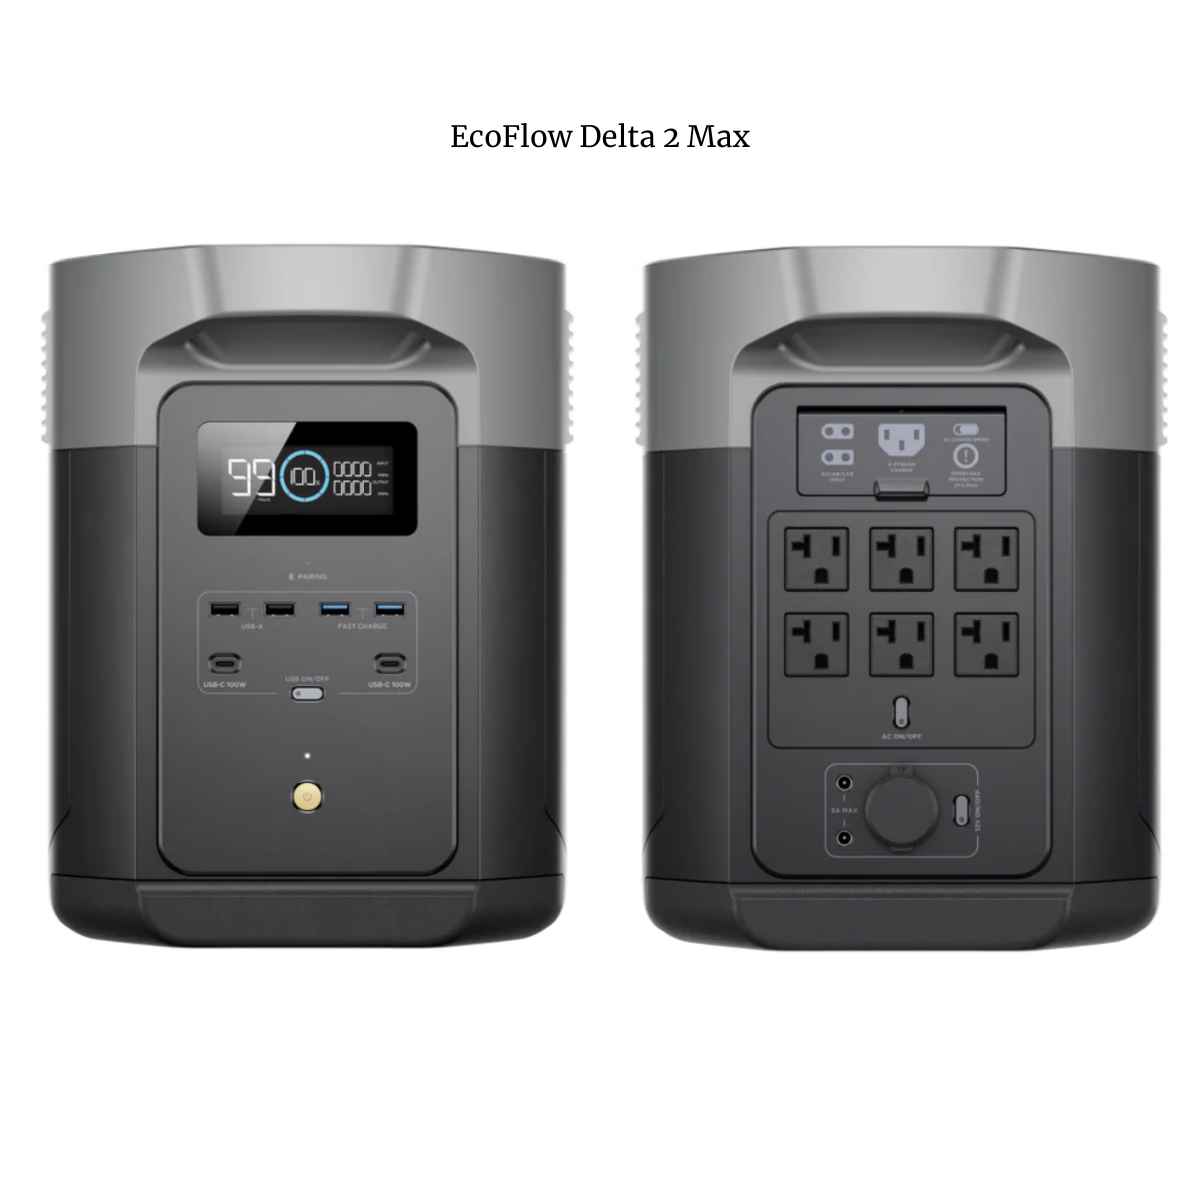 EcoFlow Outlets Ports Anker PowerHouse 767 vs EcoFlow Delta 2 Max: How Do They Compare?